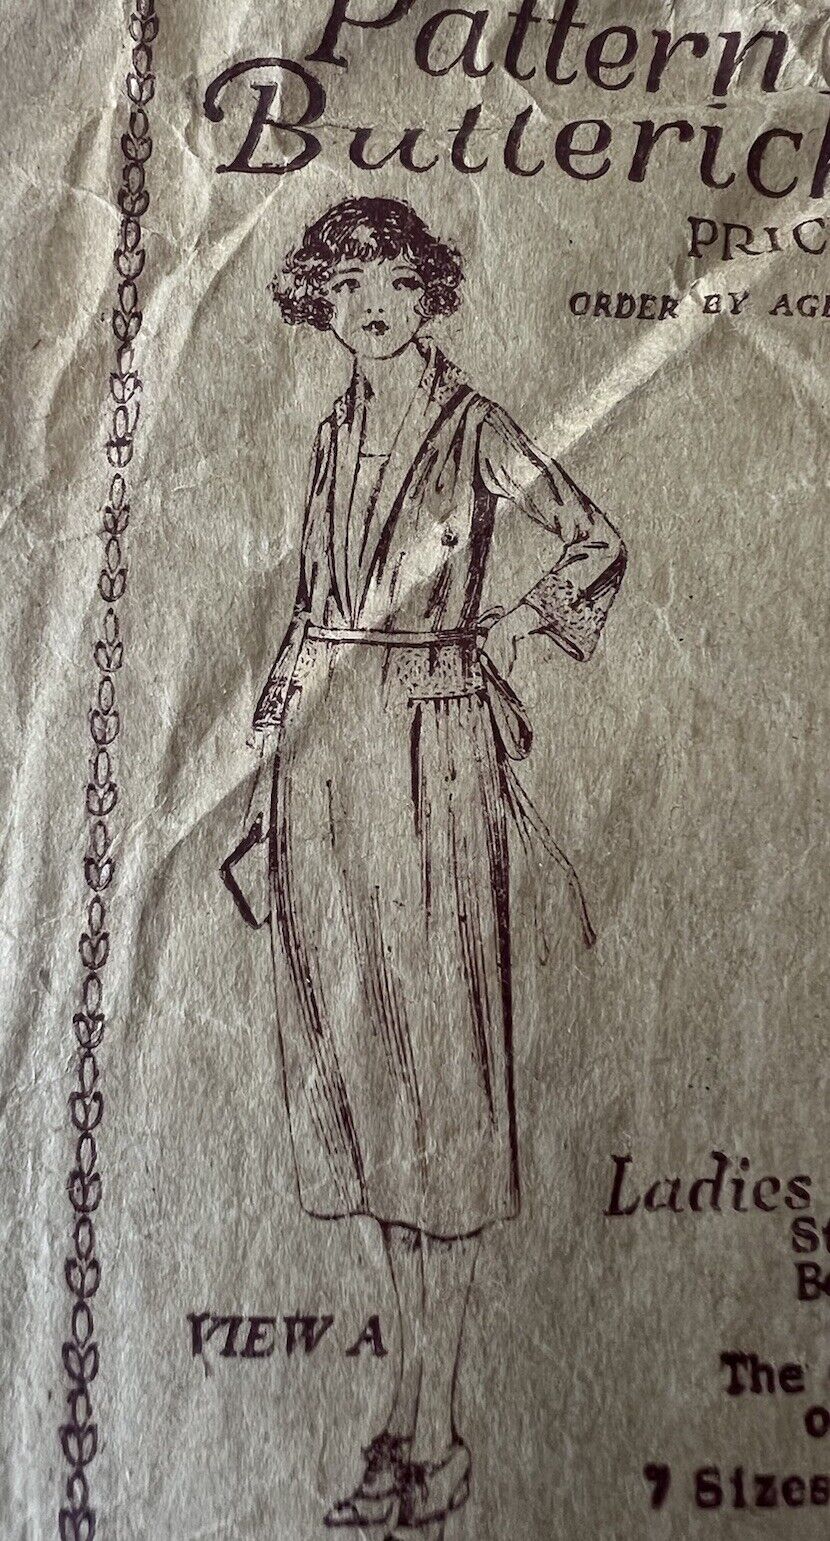 Antique Sewing Pattern 1920s Butterick Women’s Dress Age 17 Bust 34 Inch #3006